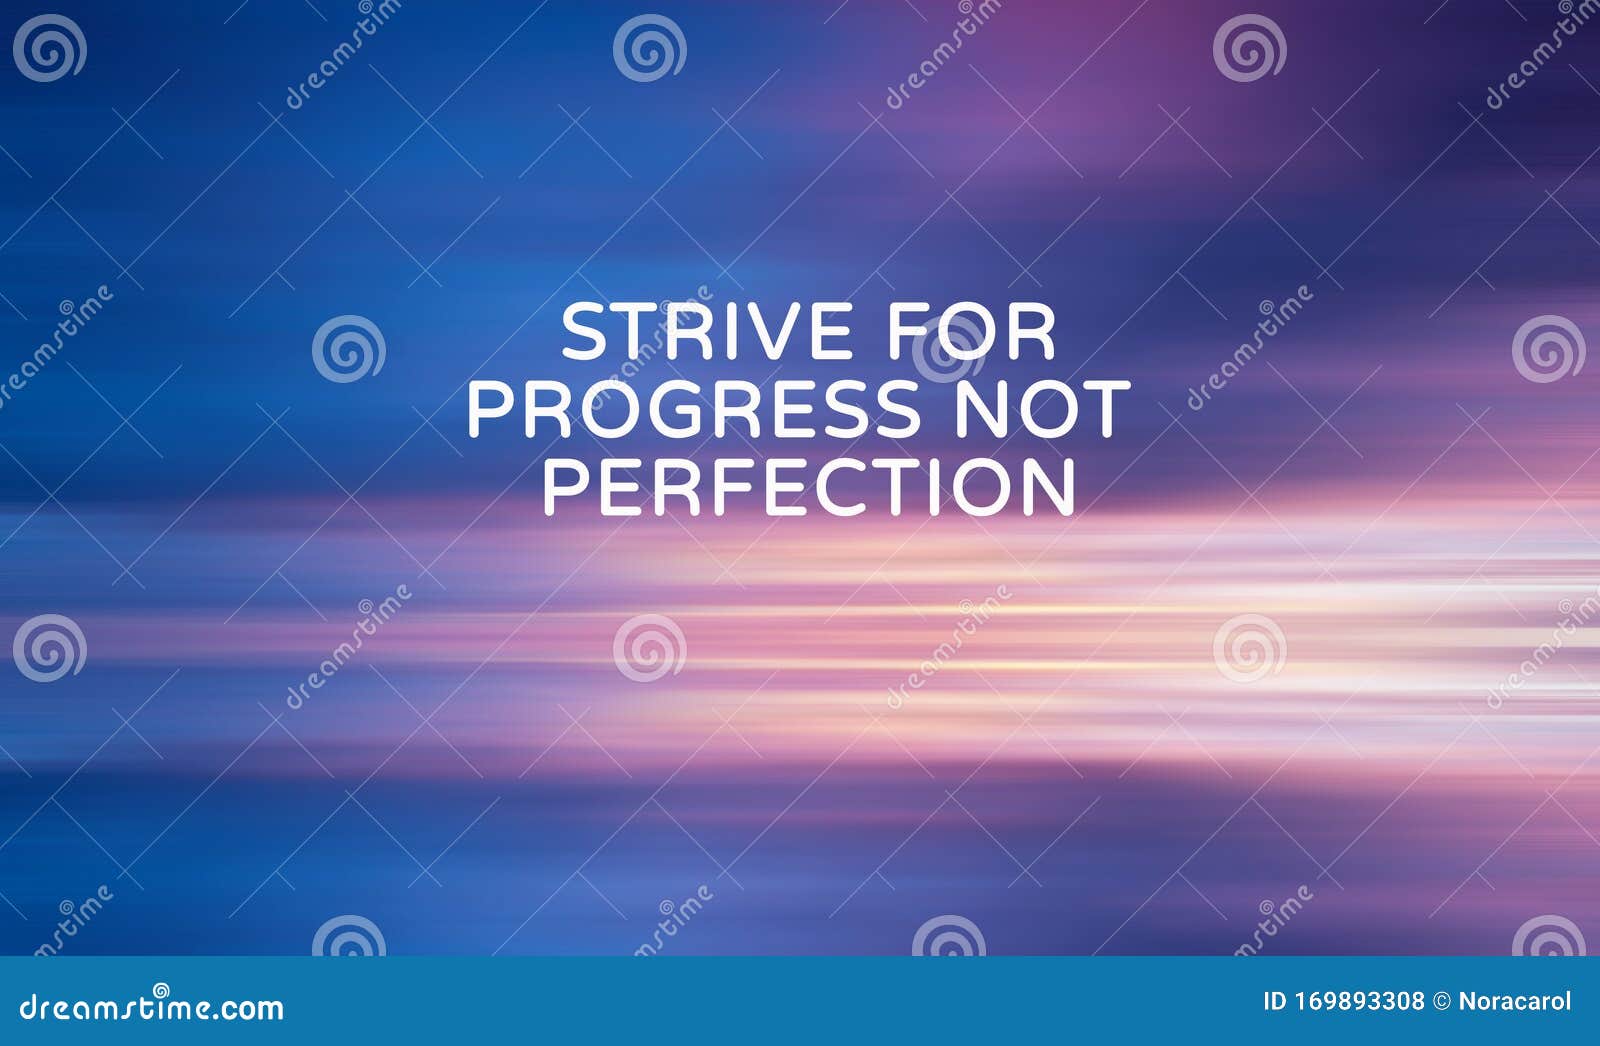 inspirational quotes - strive for progress not perfection